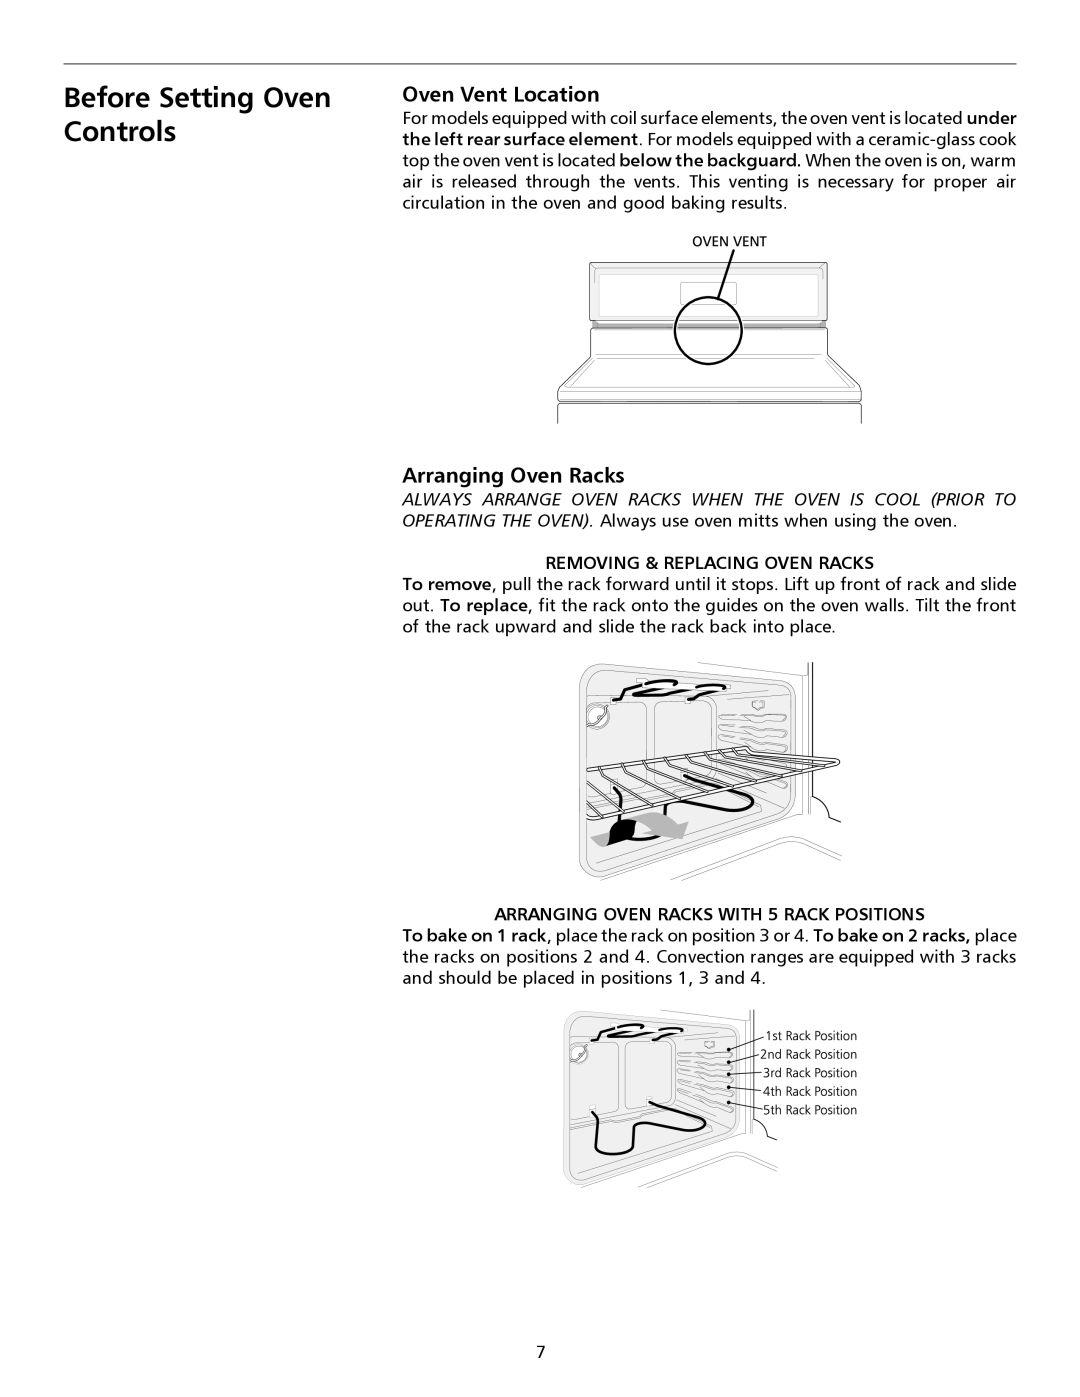 Frigidaire 316135921 important safety instructions Before Setting Oven Controls, Oven Vent Location, Arranging Oven Racks 